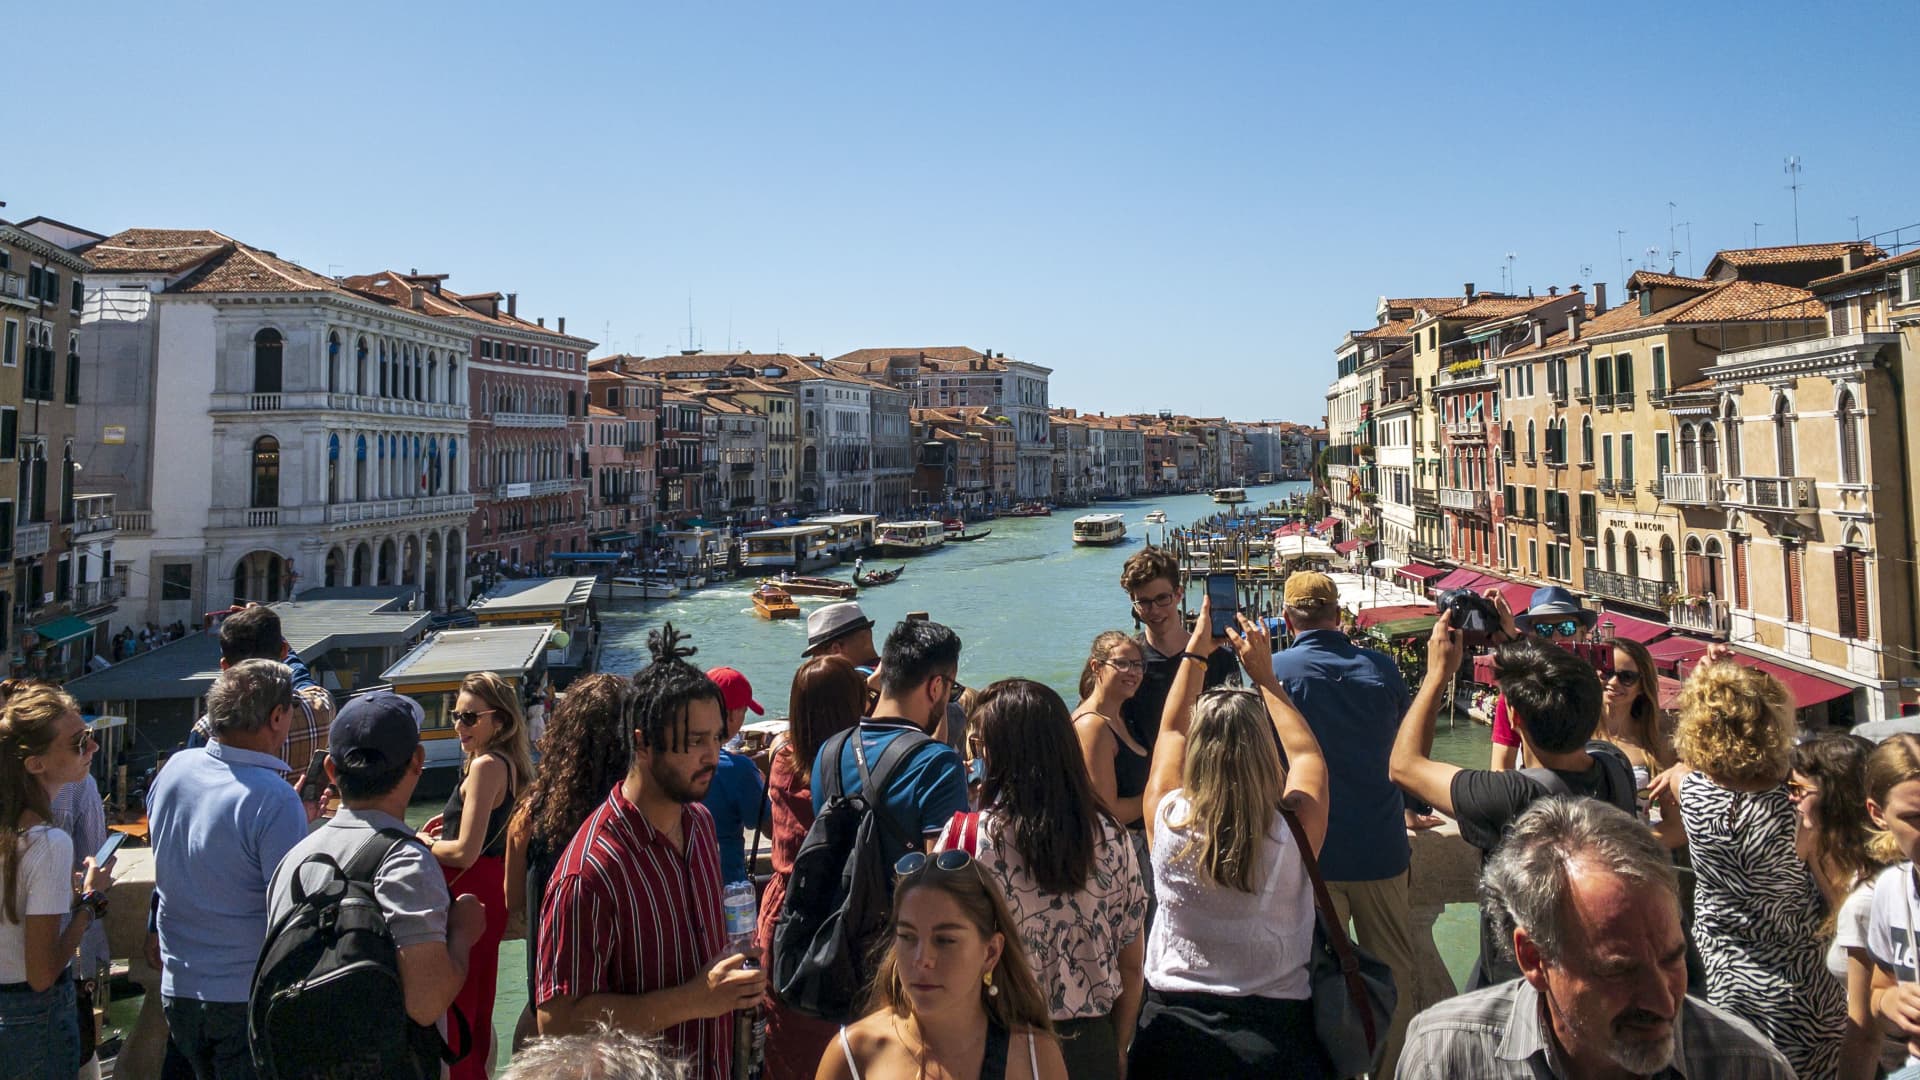 Years in the making, Venice approves a $5 tax on daytrippers